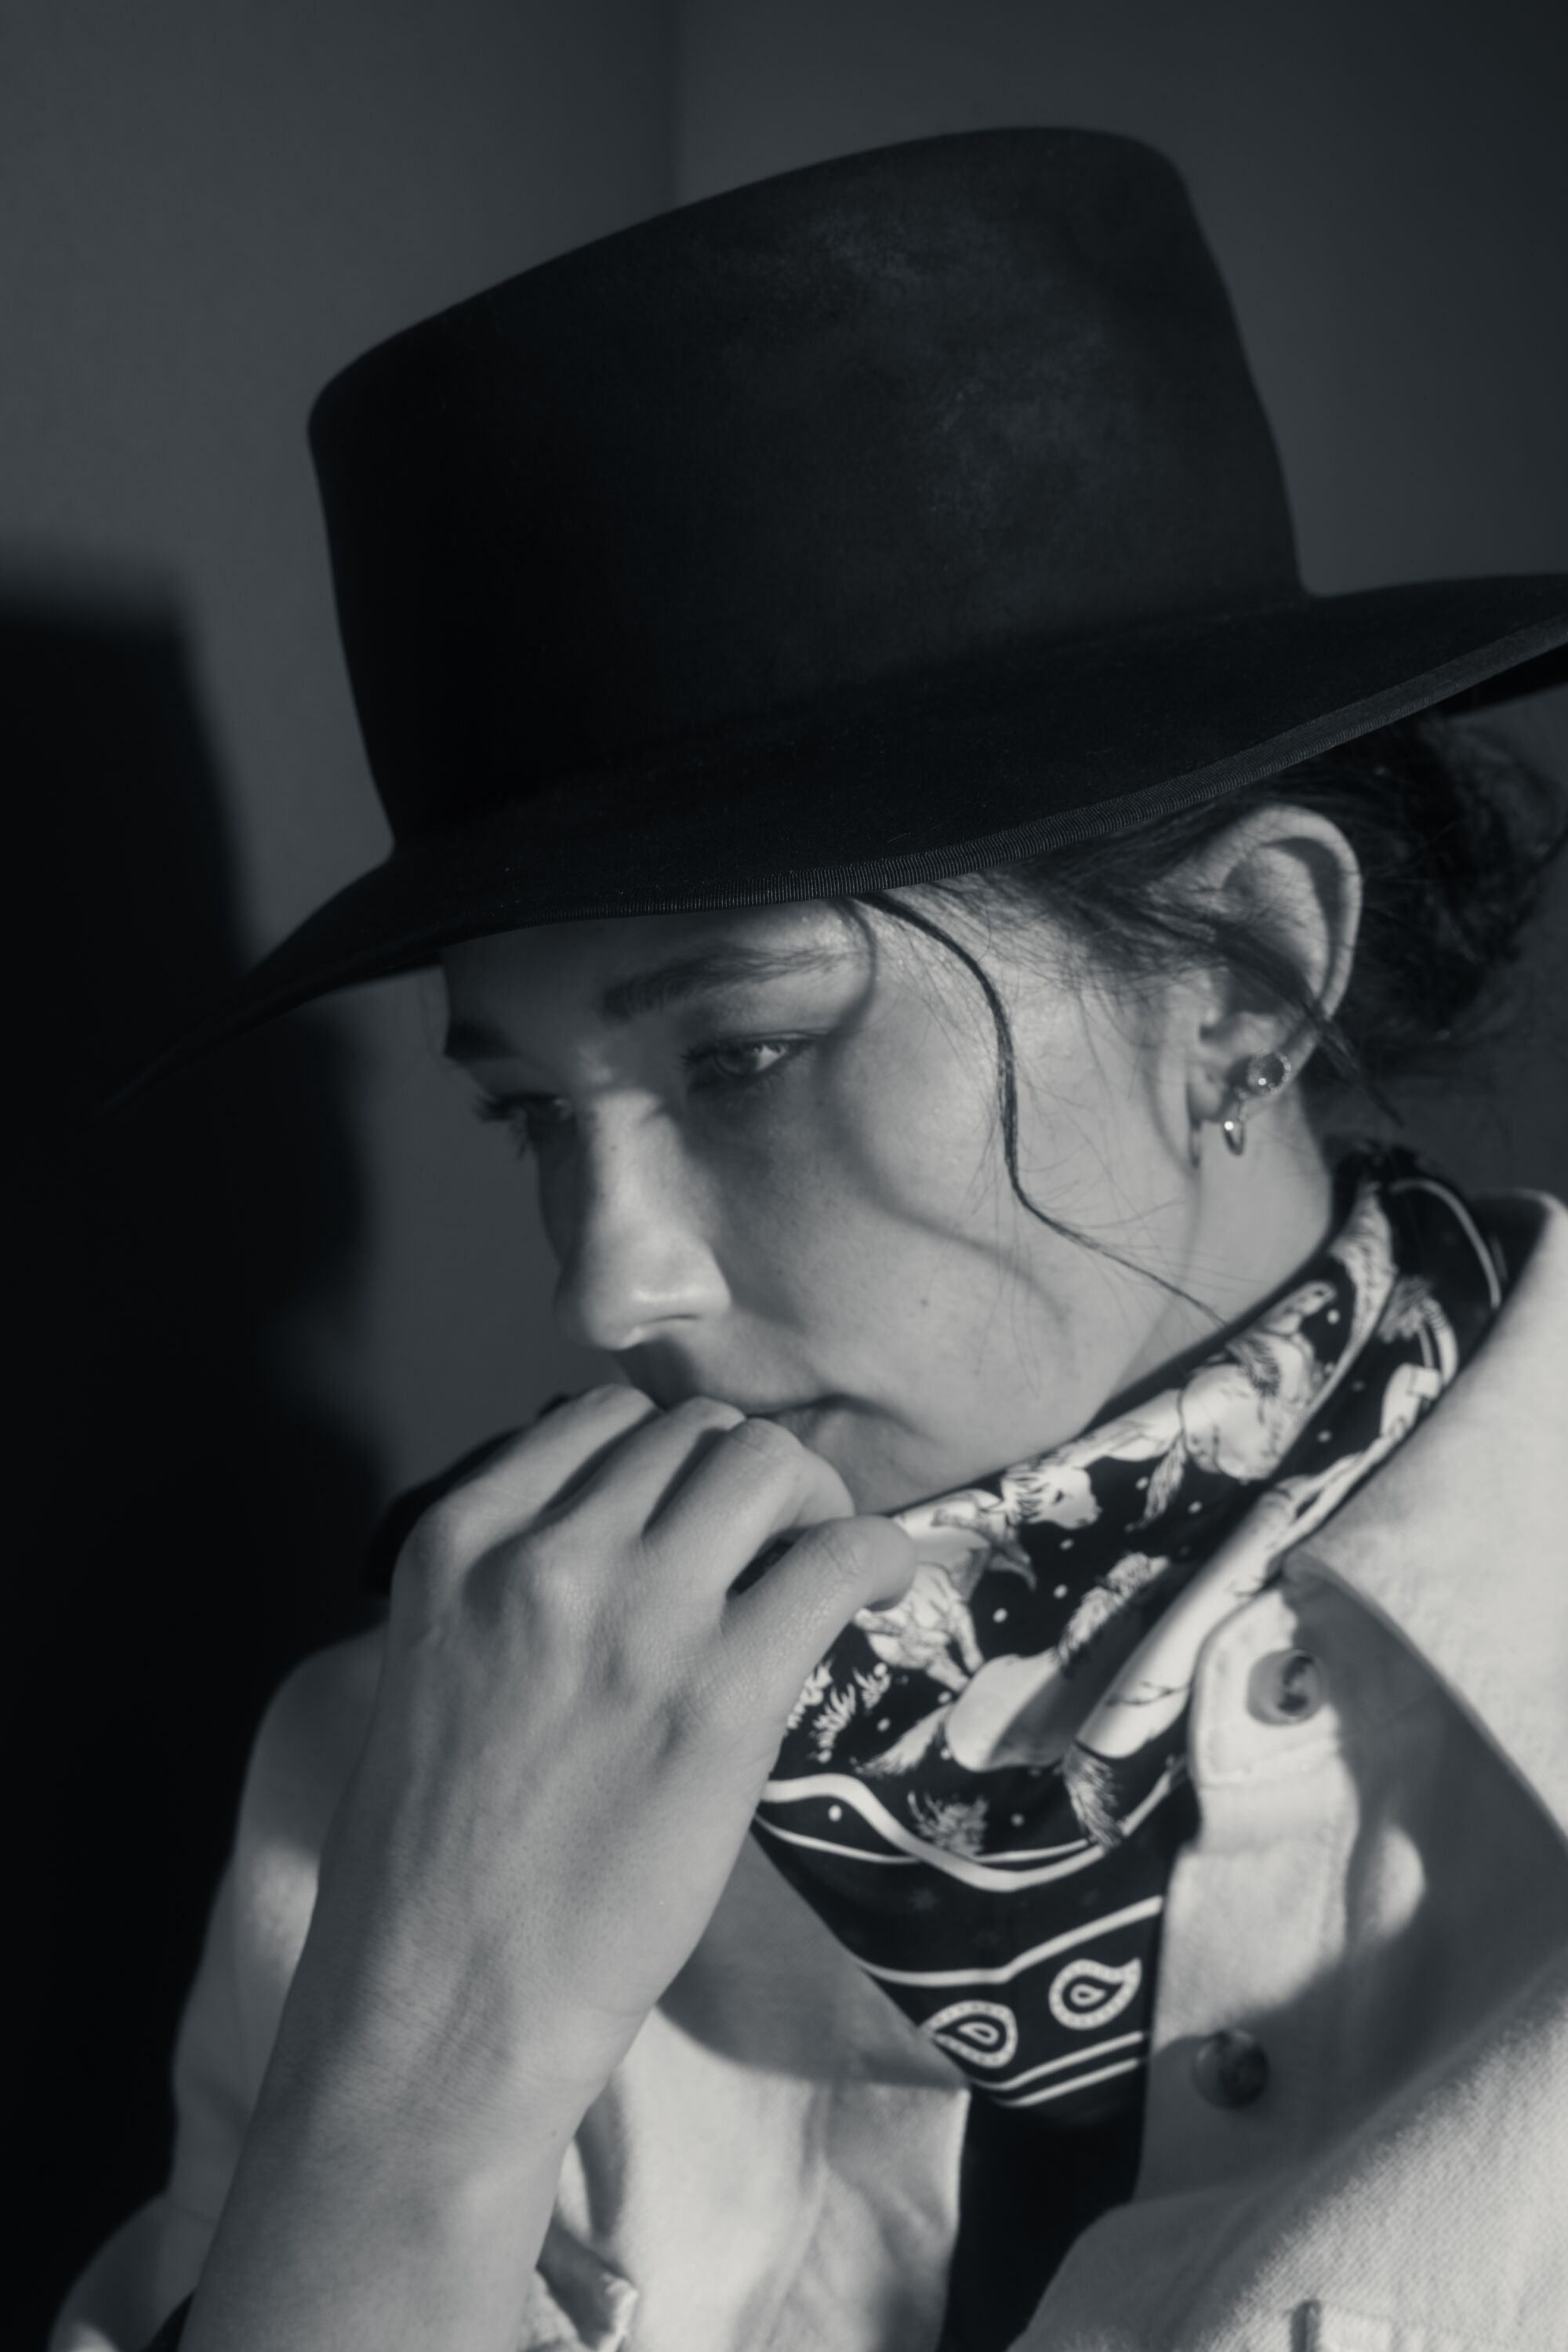 A woman in a hat looks pensive while holding her hand to her mouth.